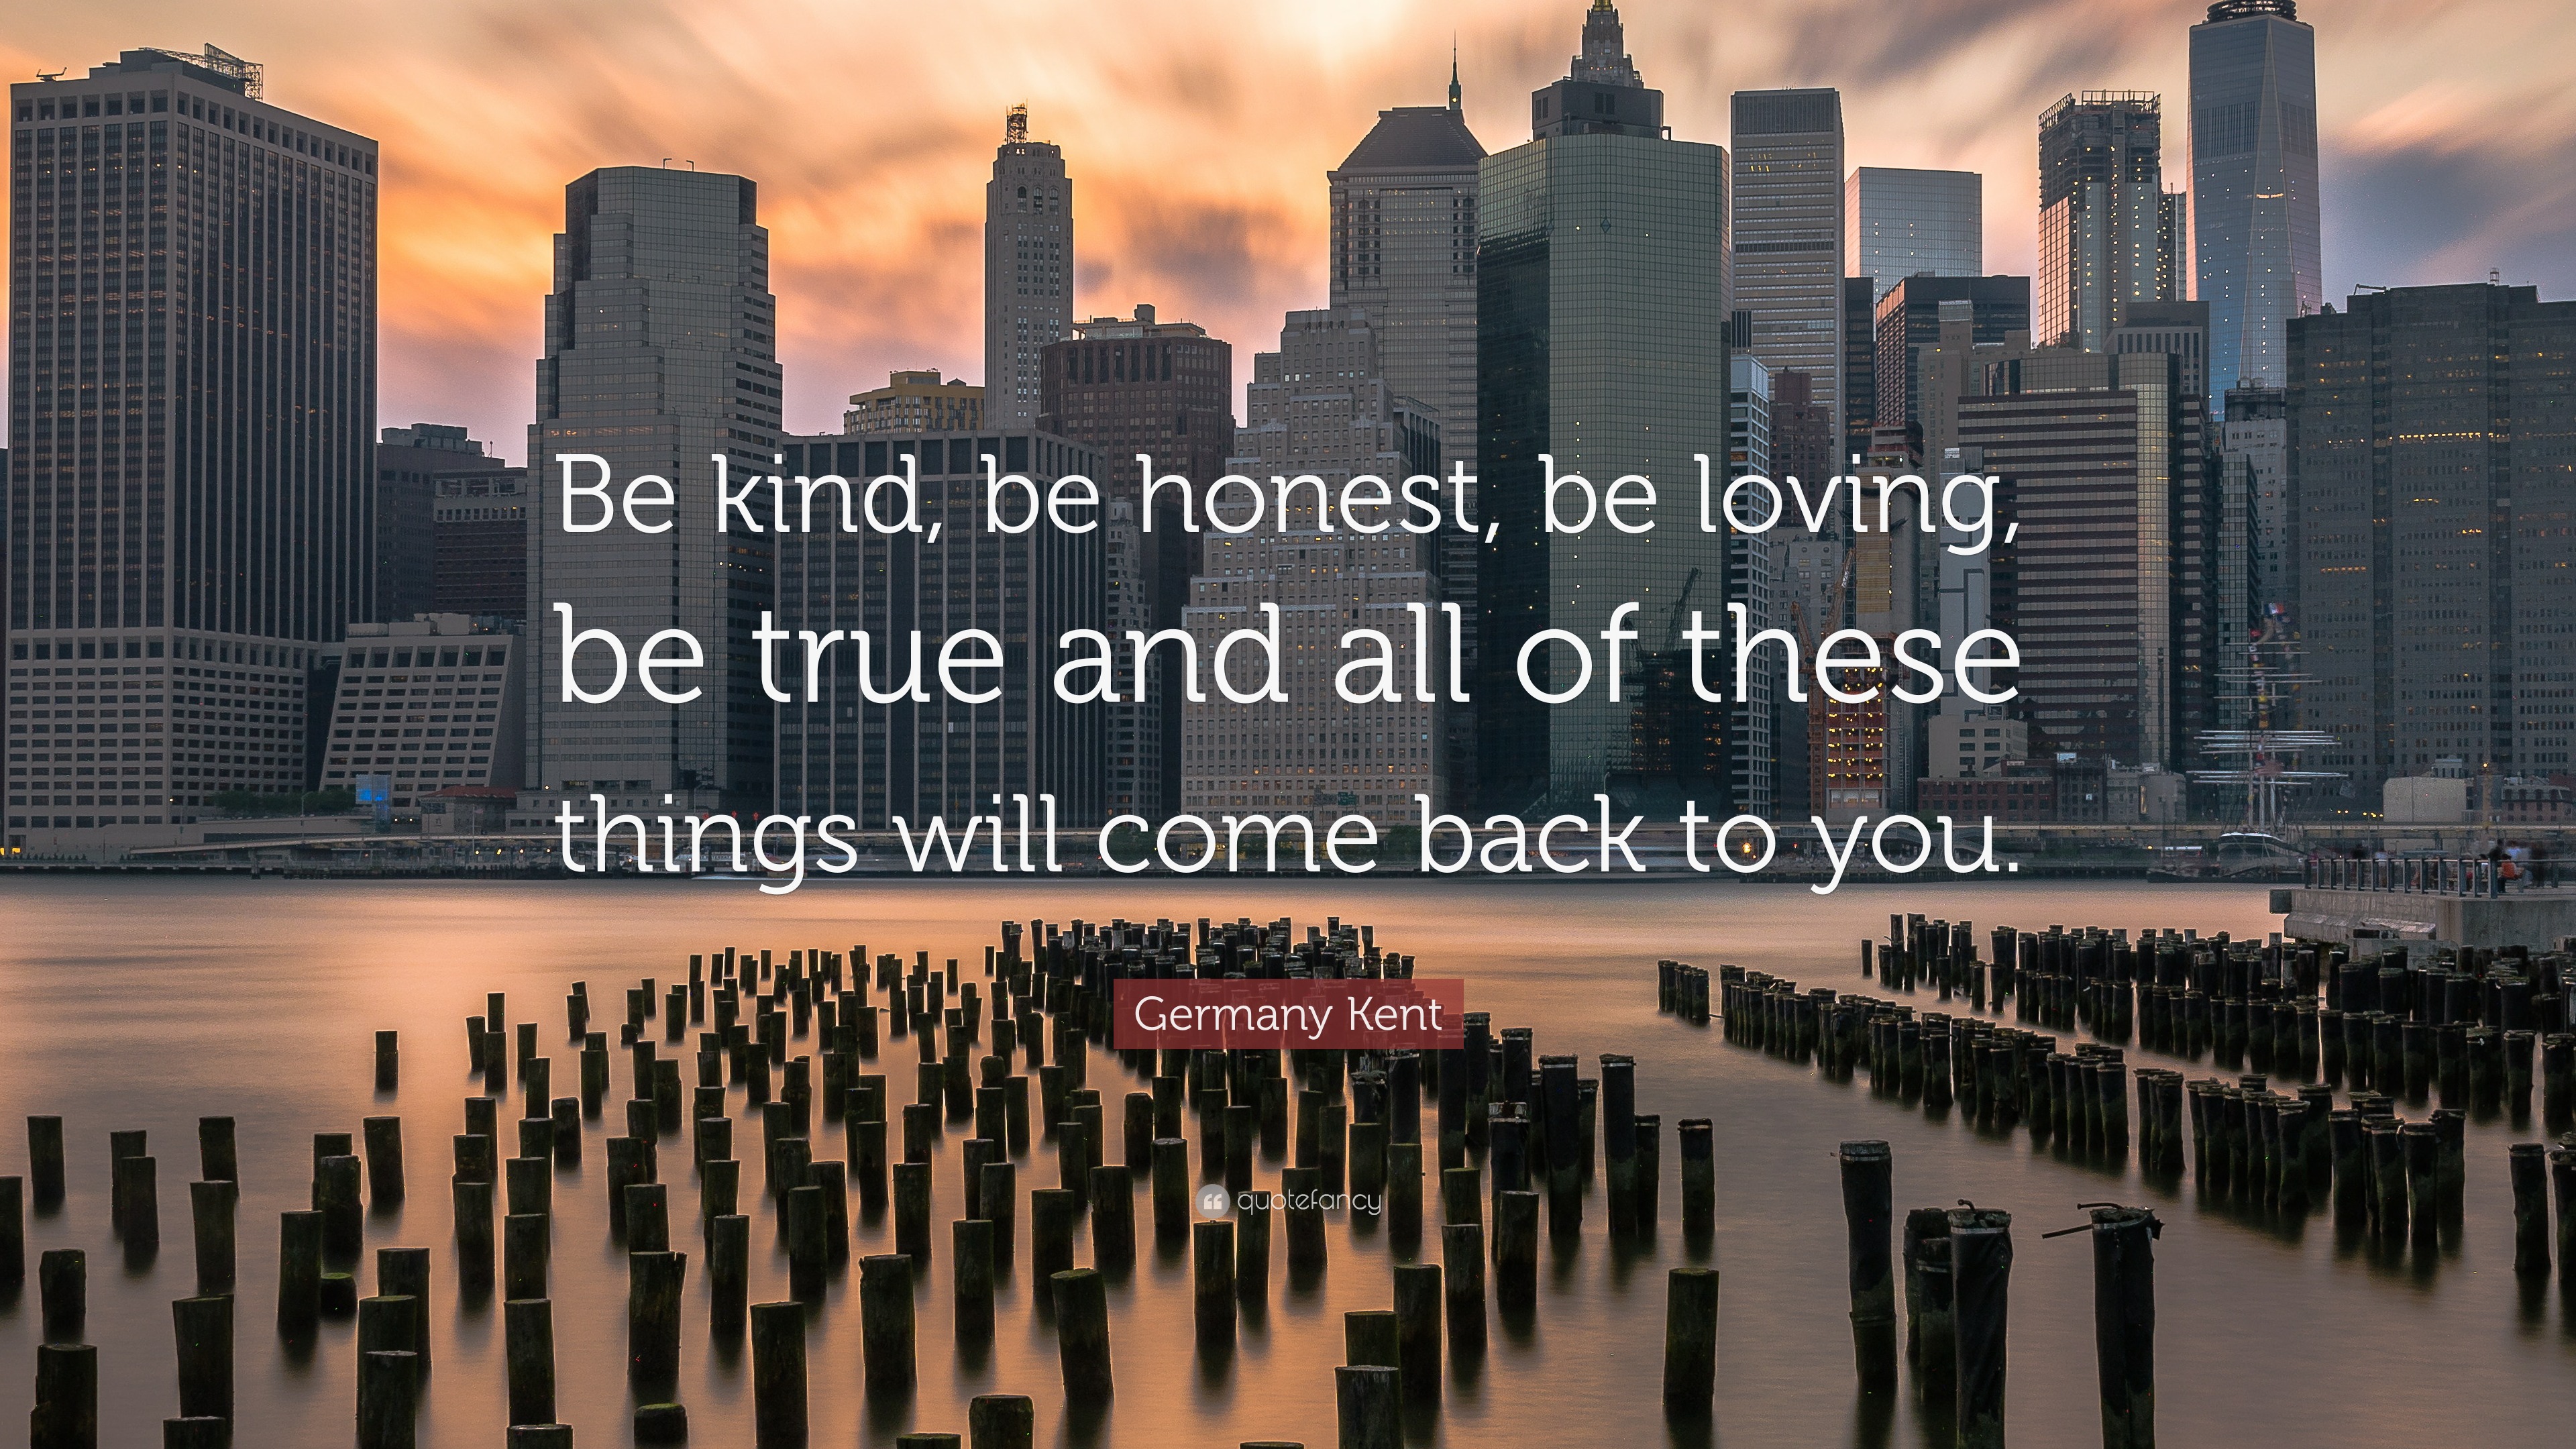 L'écriture on X: Be kind, be honest, be loving, be true and all of these  things will come back to you #quotes    / X